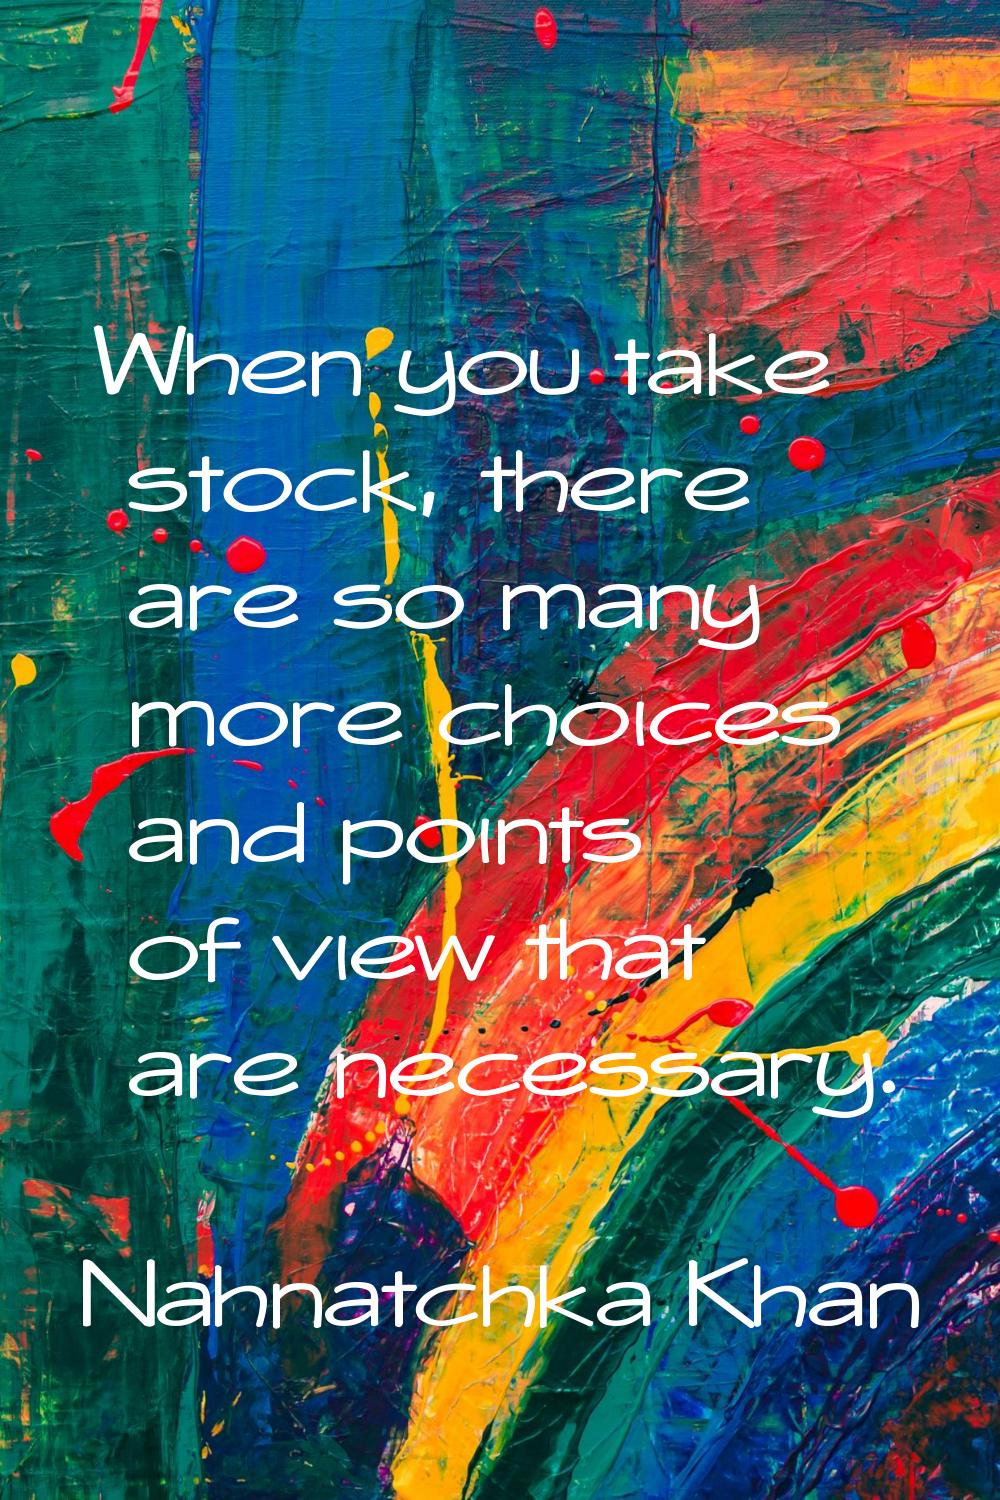 When you take stock, there are so many more choices and points of view that are necessary.